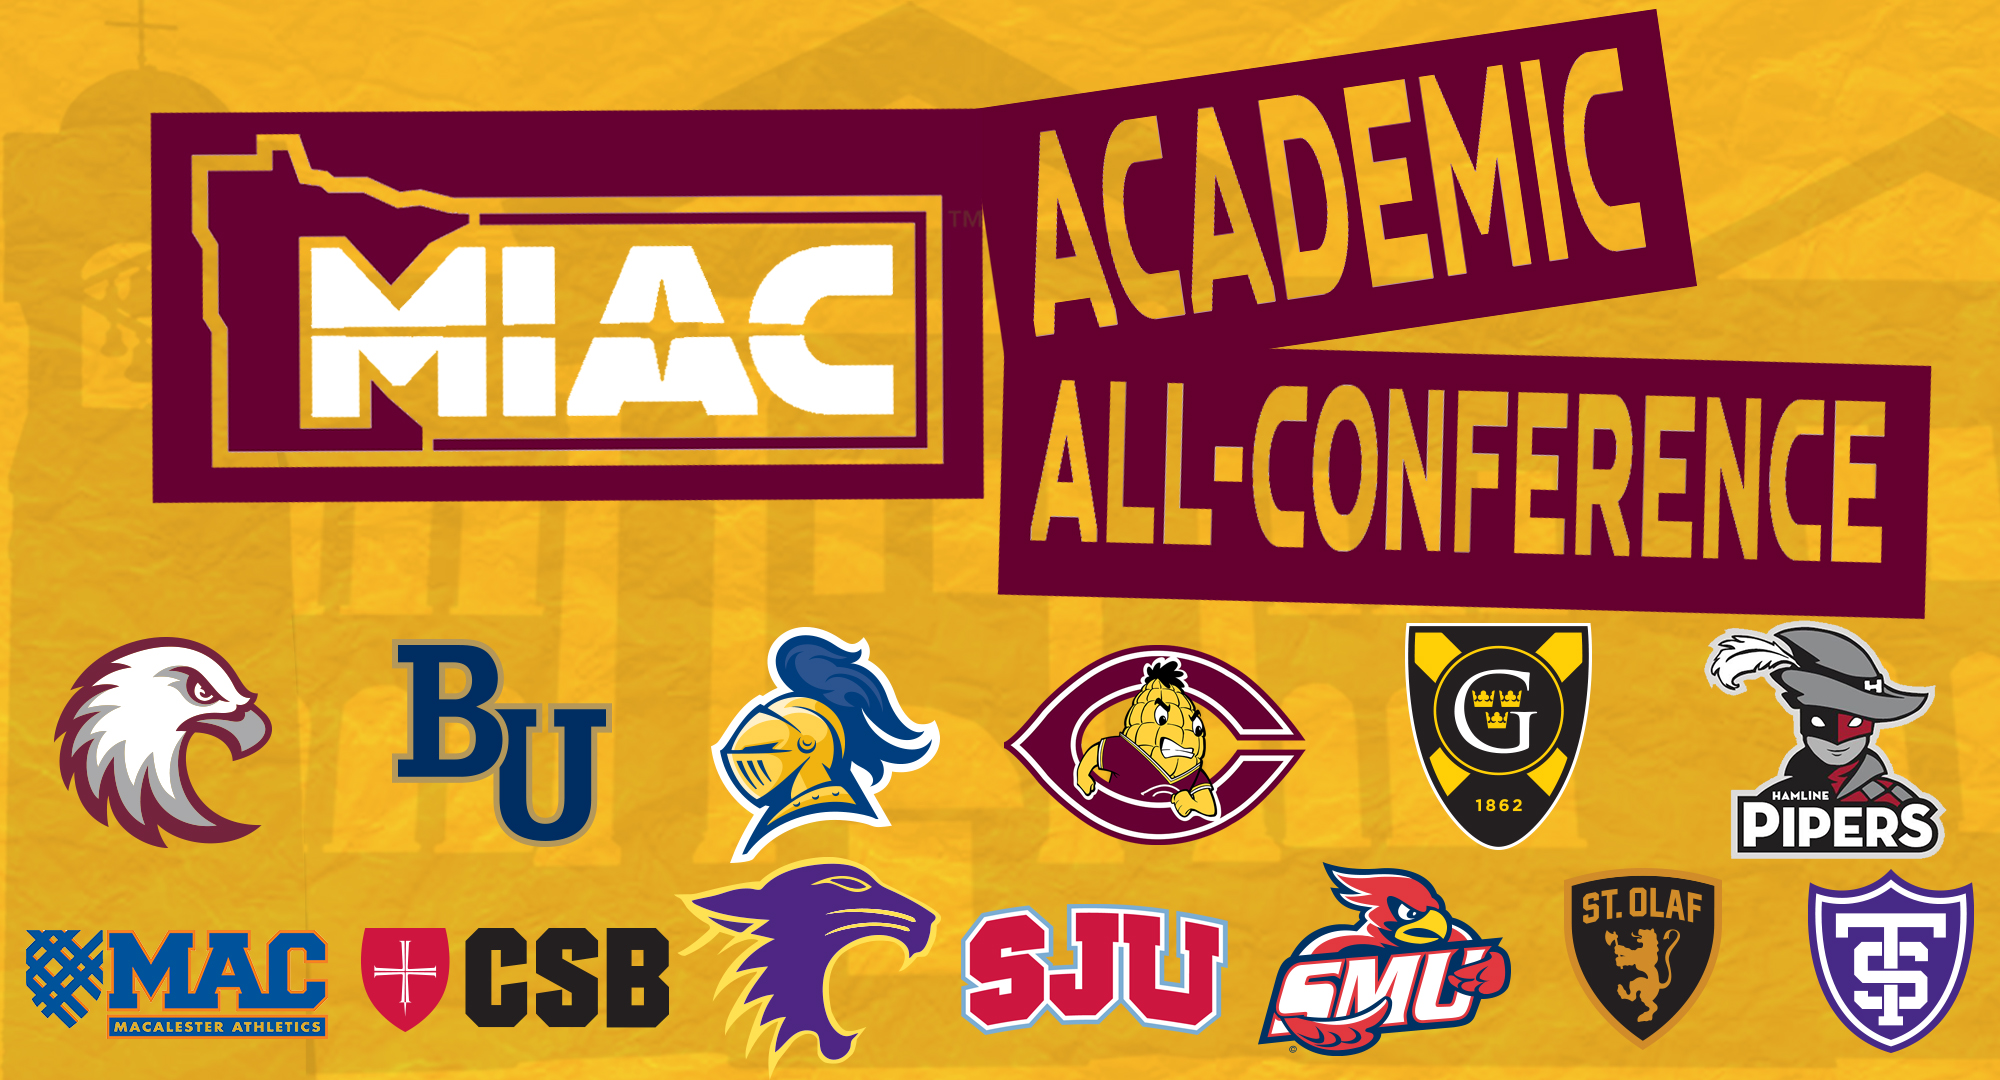 Concordia had 123 student/athletes earn MIAC Academic All-Conference honors for the entire 2020-21 academic year.